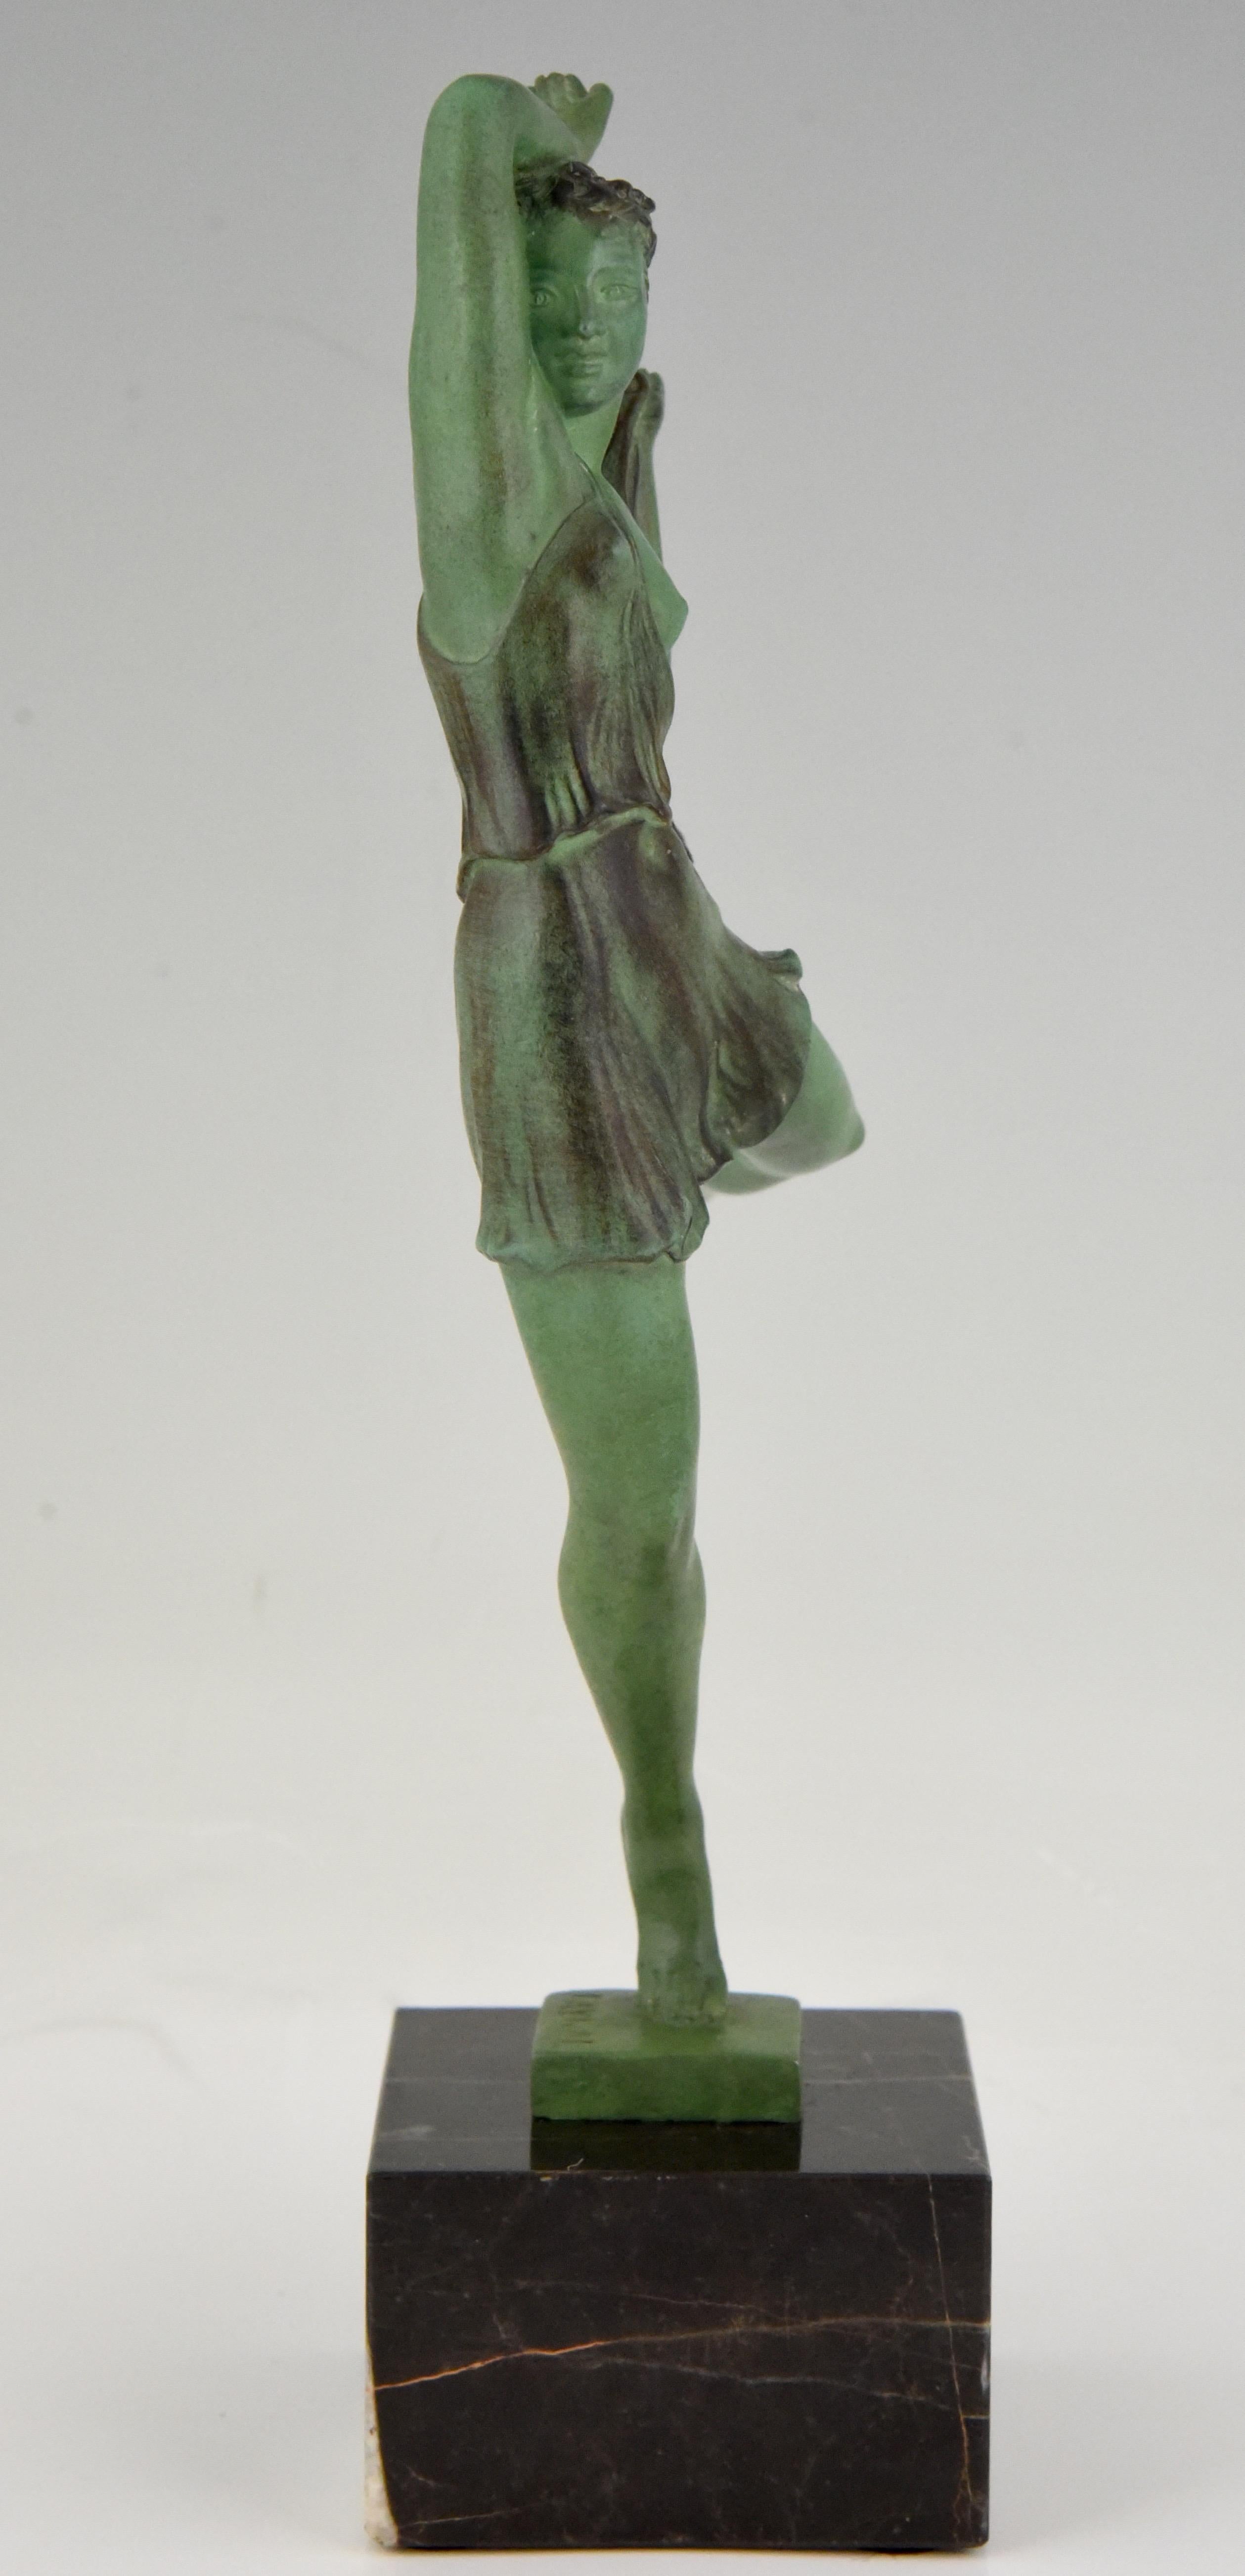 French Art Deco Sculpture of a Female Dancer Fayral Le Faguays for Max Le Verrier, 1930